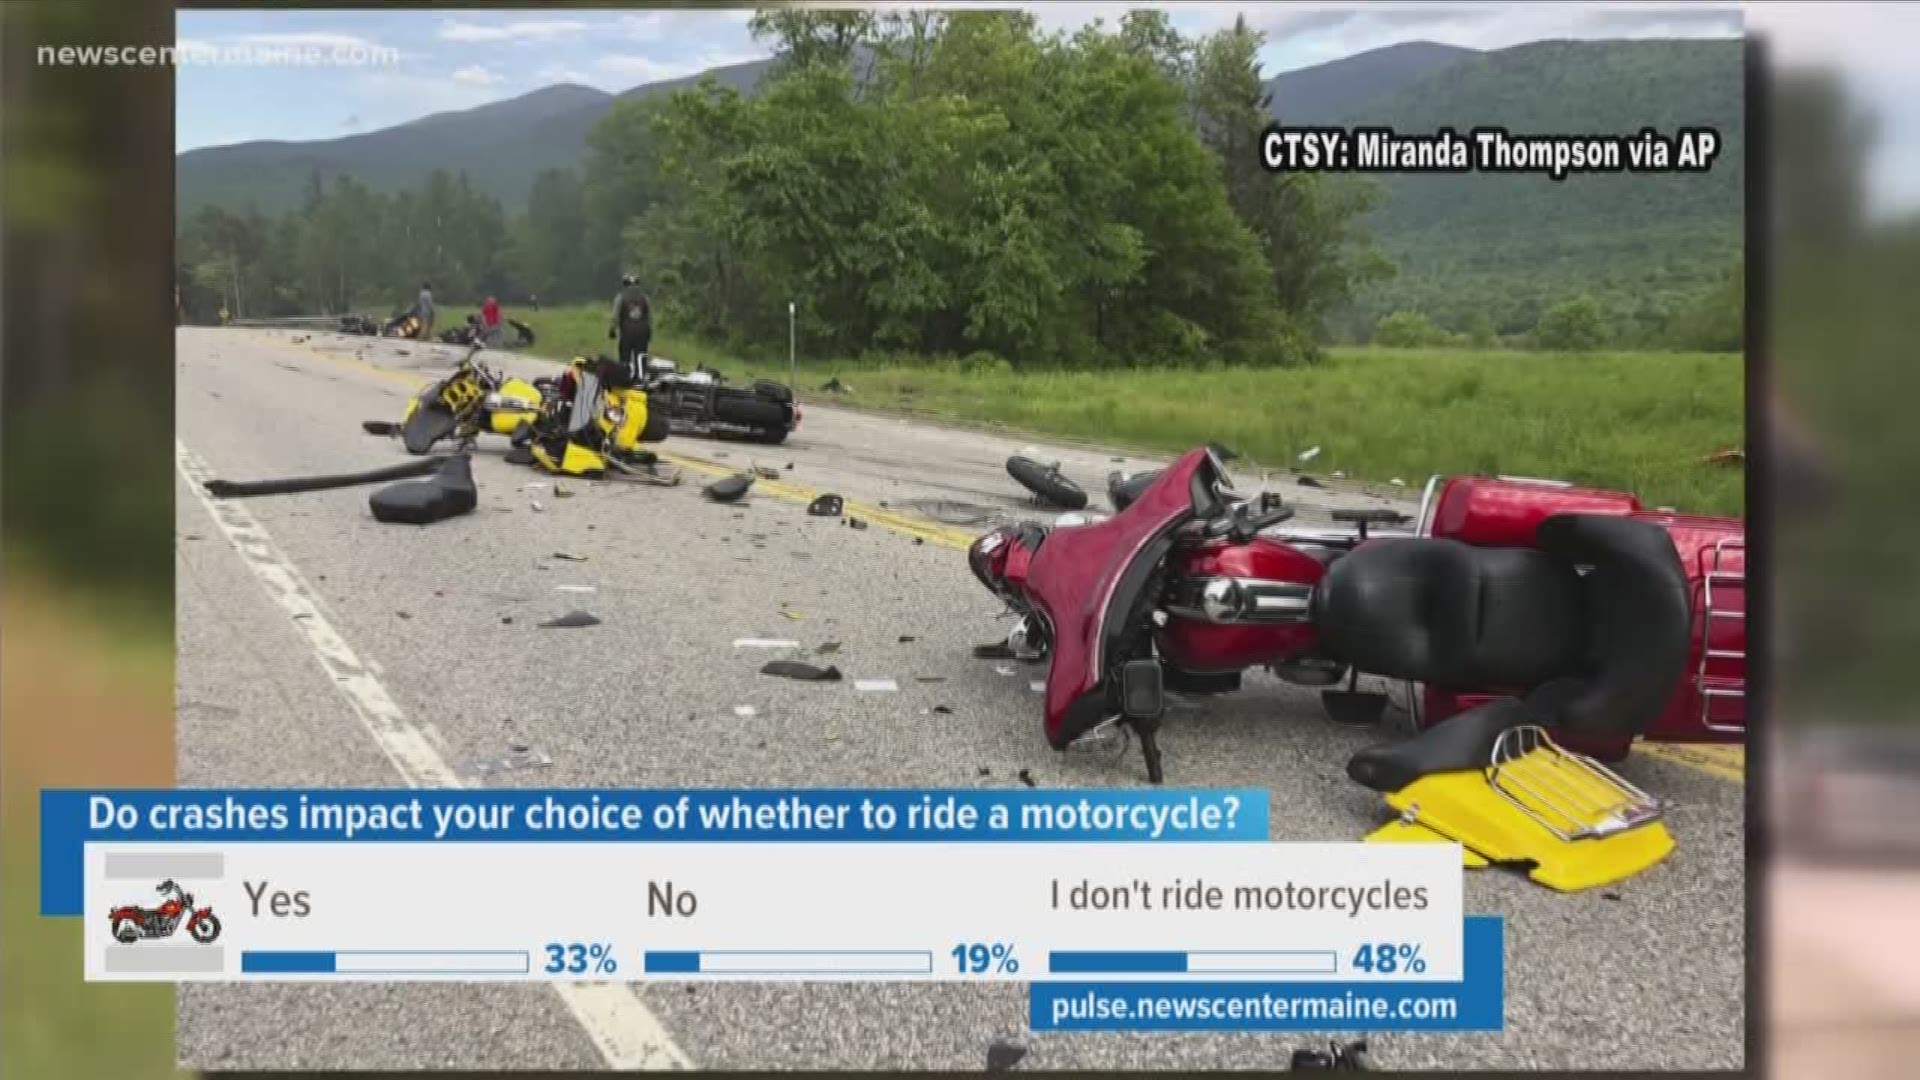 Motorcyclist giving up riding after recent crashes.